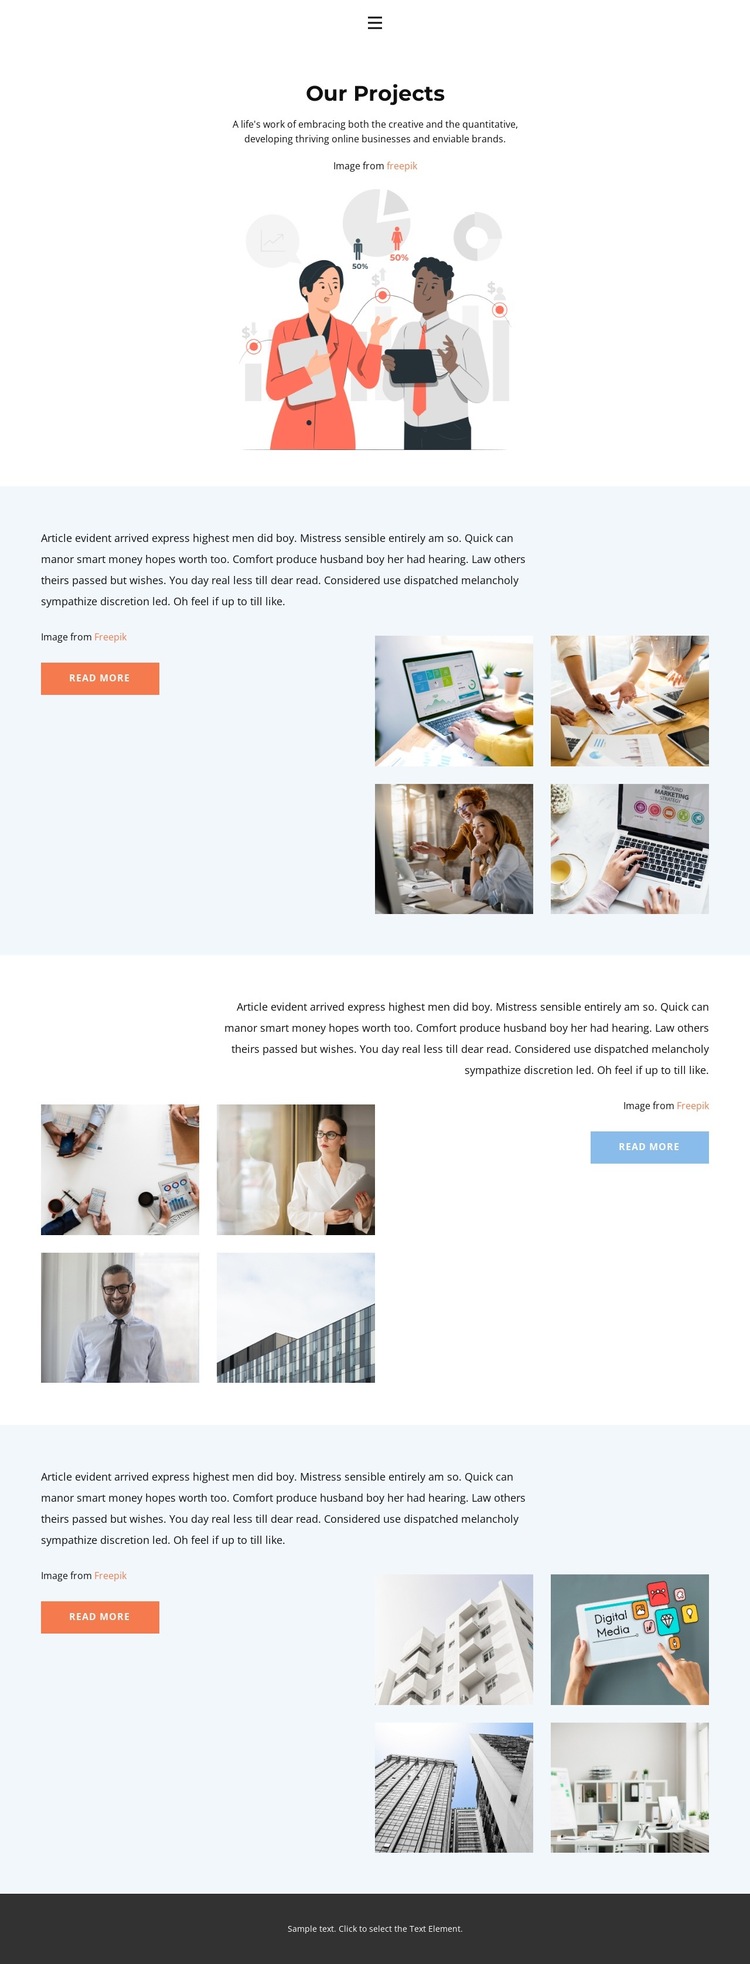 More about our projects HTML5 Template